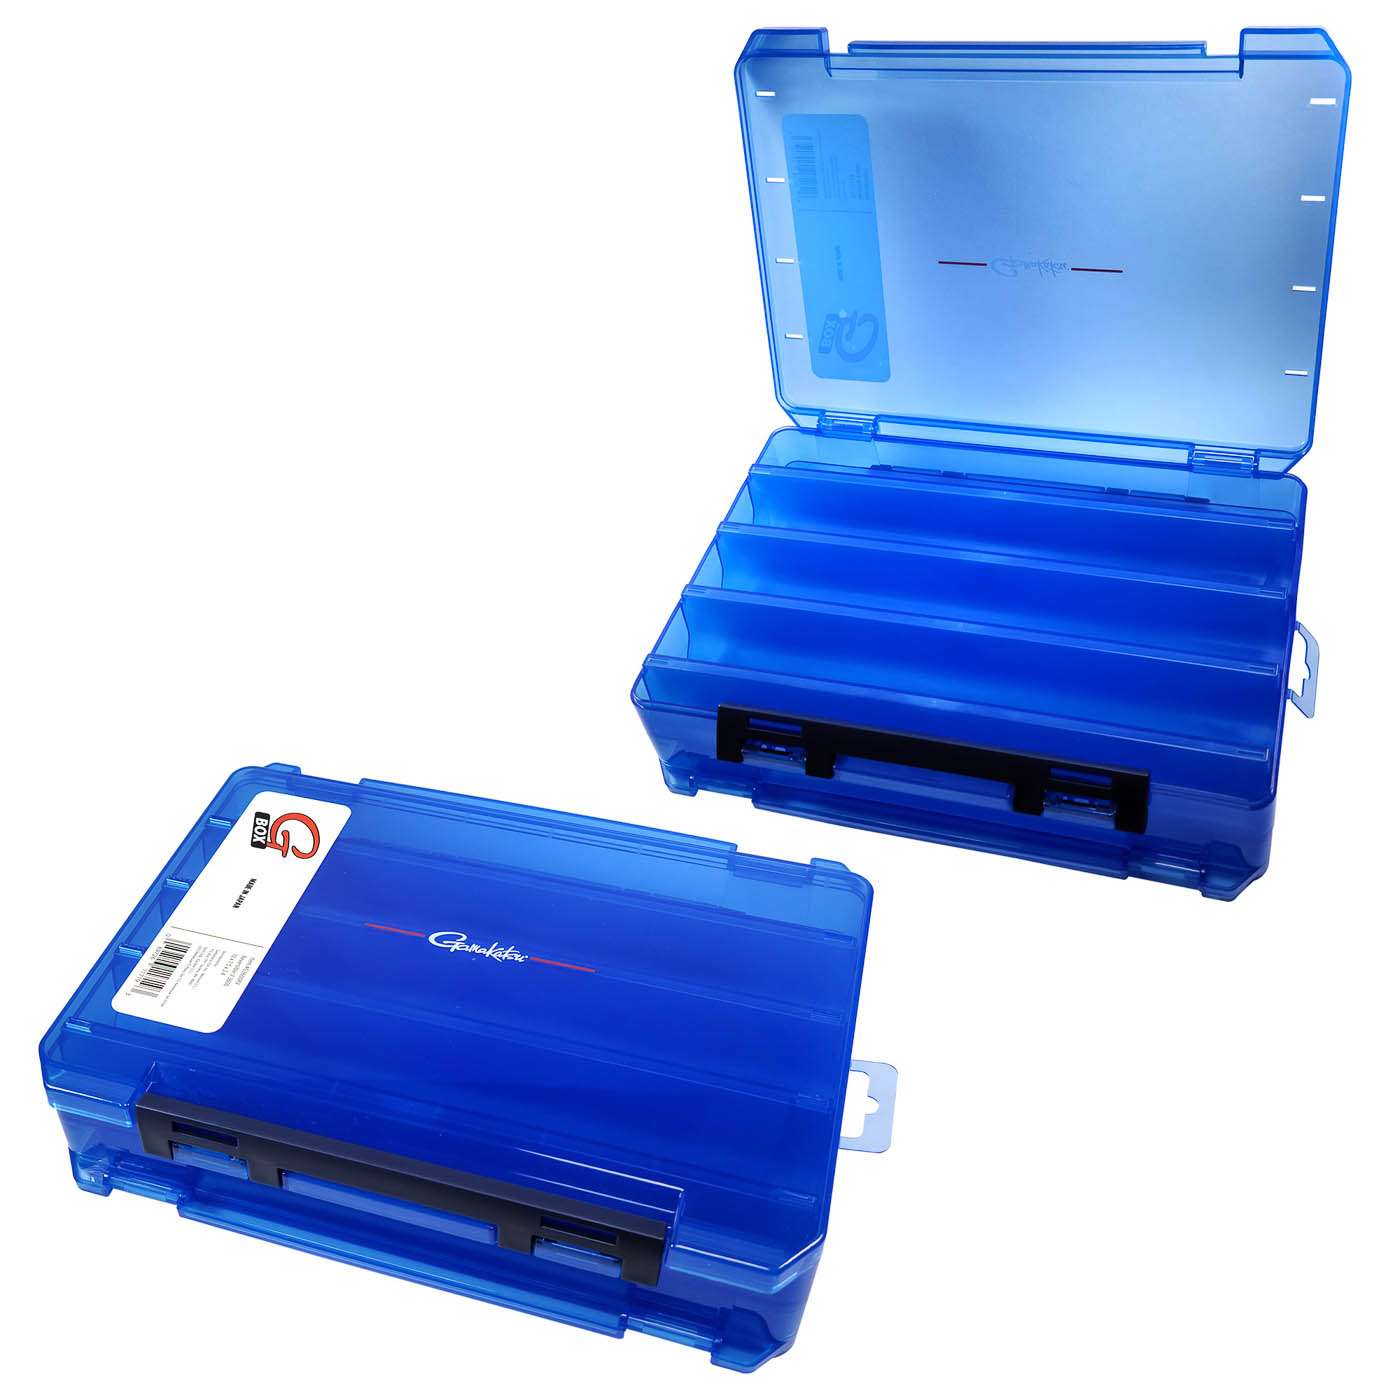 <p><strong>Gamakatsu G-Box Reversible 3600</strong></p><p>Gamakatsu takes tackle storage to the next level with the new G-Box 3600 Reversible Utility Case. The innovative design places a lid on both sides of the box, effectively creating two separate containers in one unit. Each side of the G-Box 3600 Reversible Utility Case has its own lid, doubling tangle-free storage space in each container. The new design features V-shaped dividers that keep jigs, crankbaits and other favorites organized and ready to go. Stash a different type of lure on each side and switch fishing styles with a flip of a box. Wide, locking latches keep the boxes securely shut even if they bounce along in the boat or the bag. $24.60. <a href=